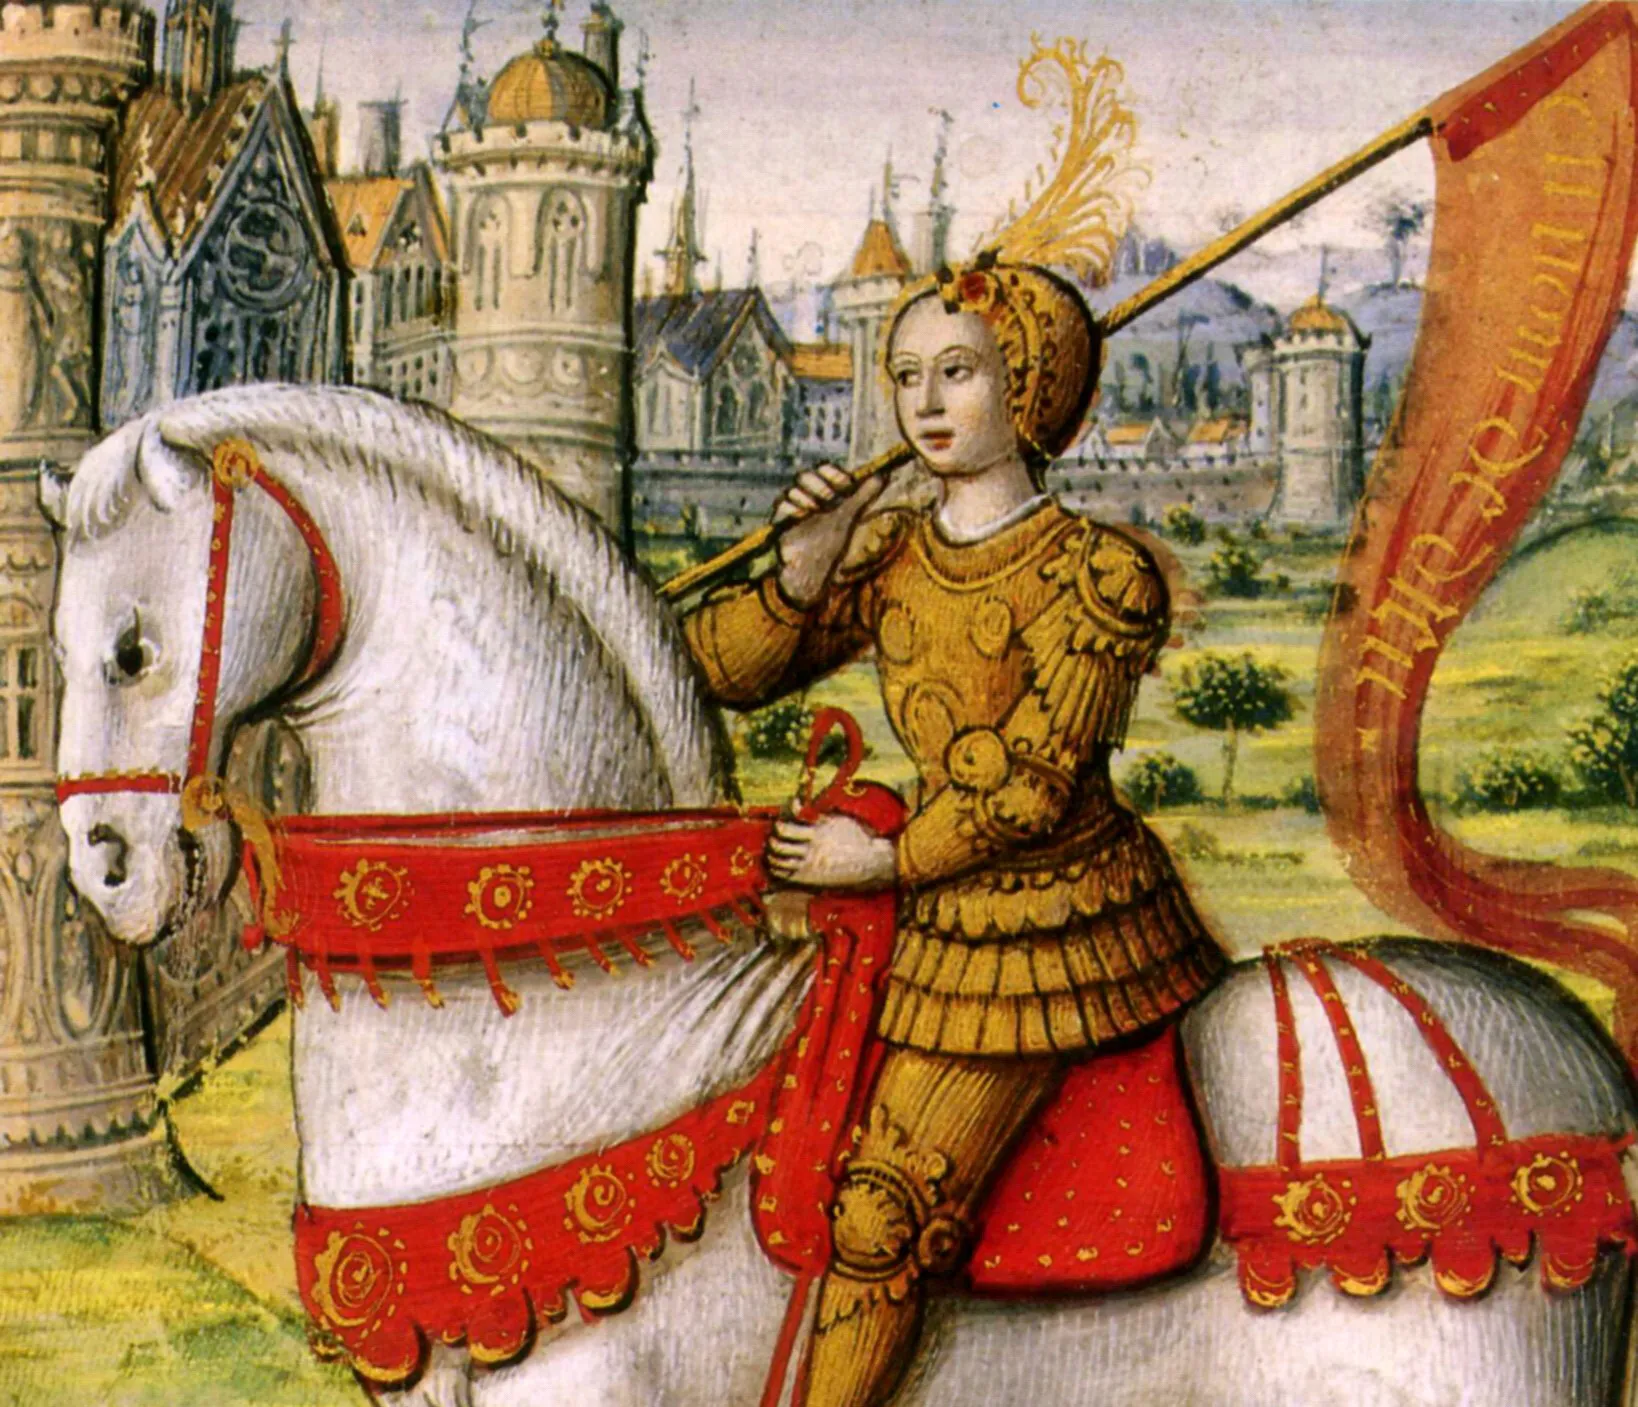 Joan of Arc depicted on horseback in an illustration from a 1504 manuscript.?w=200&h=150